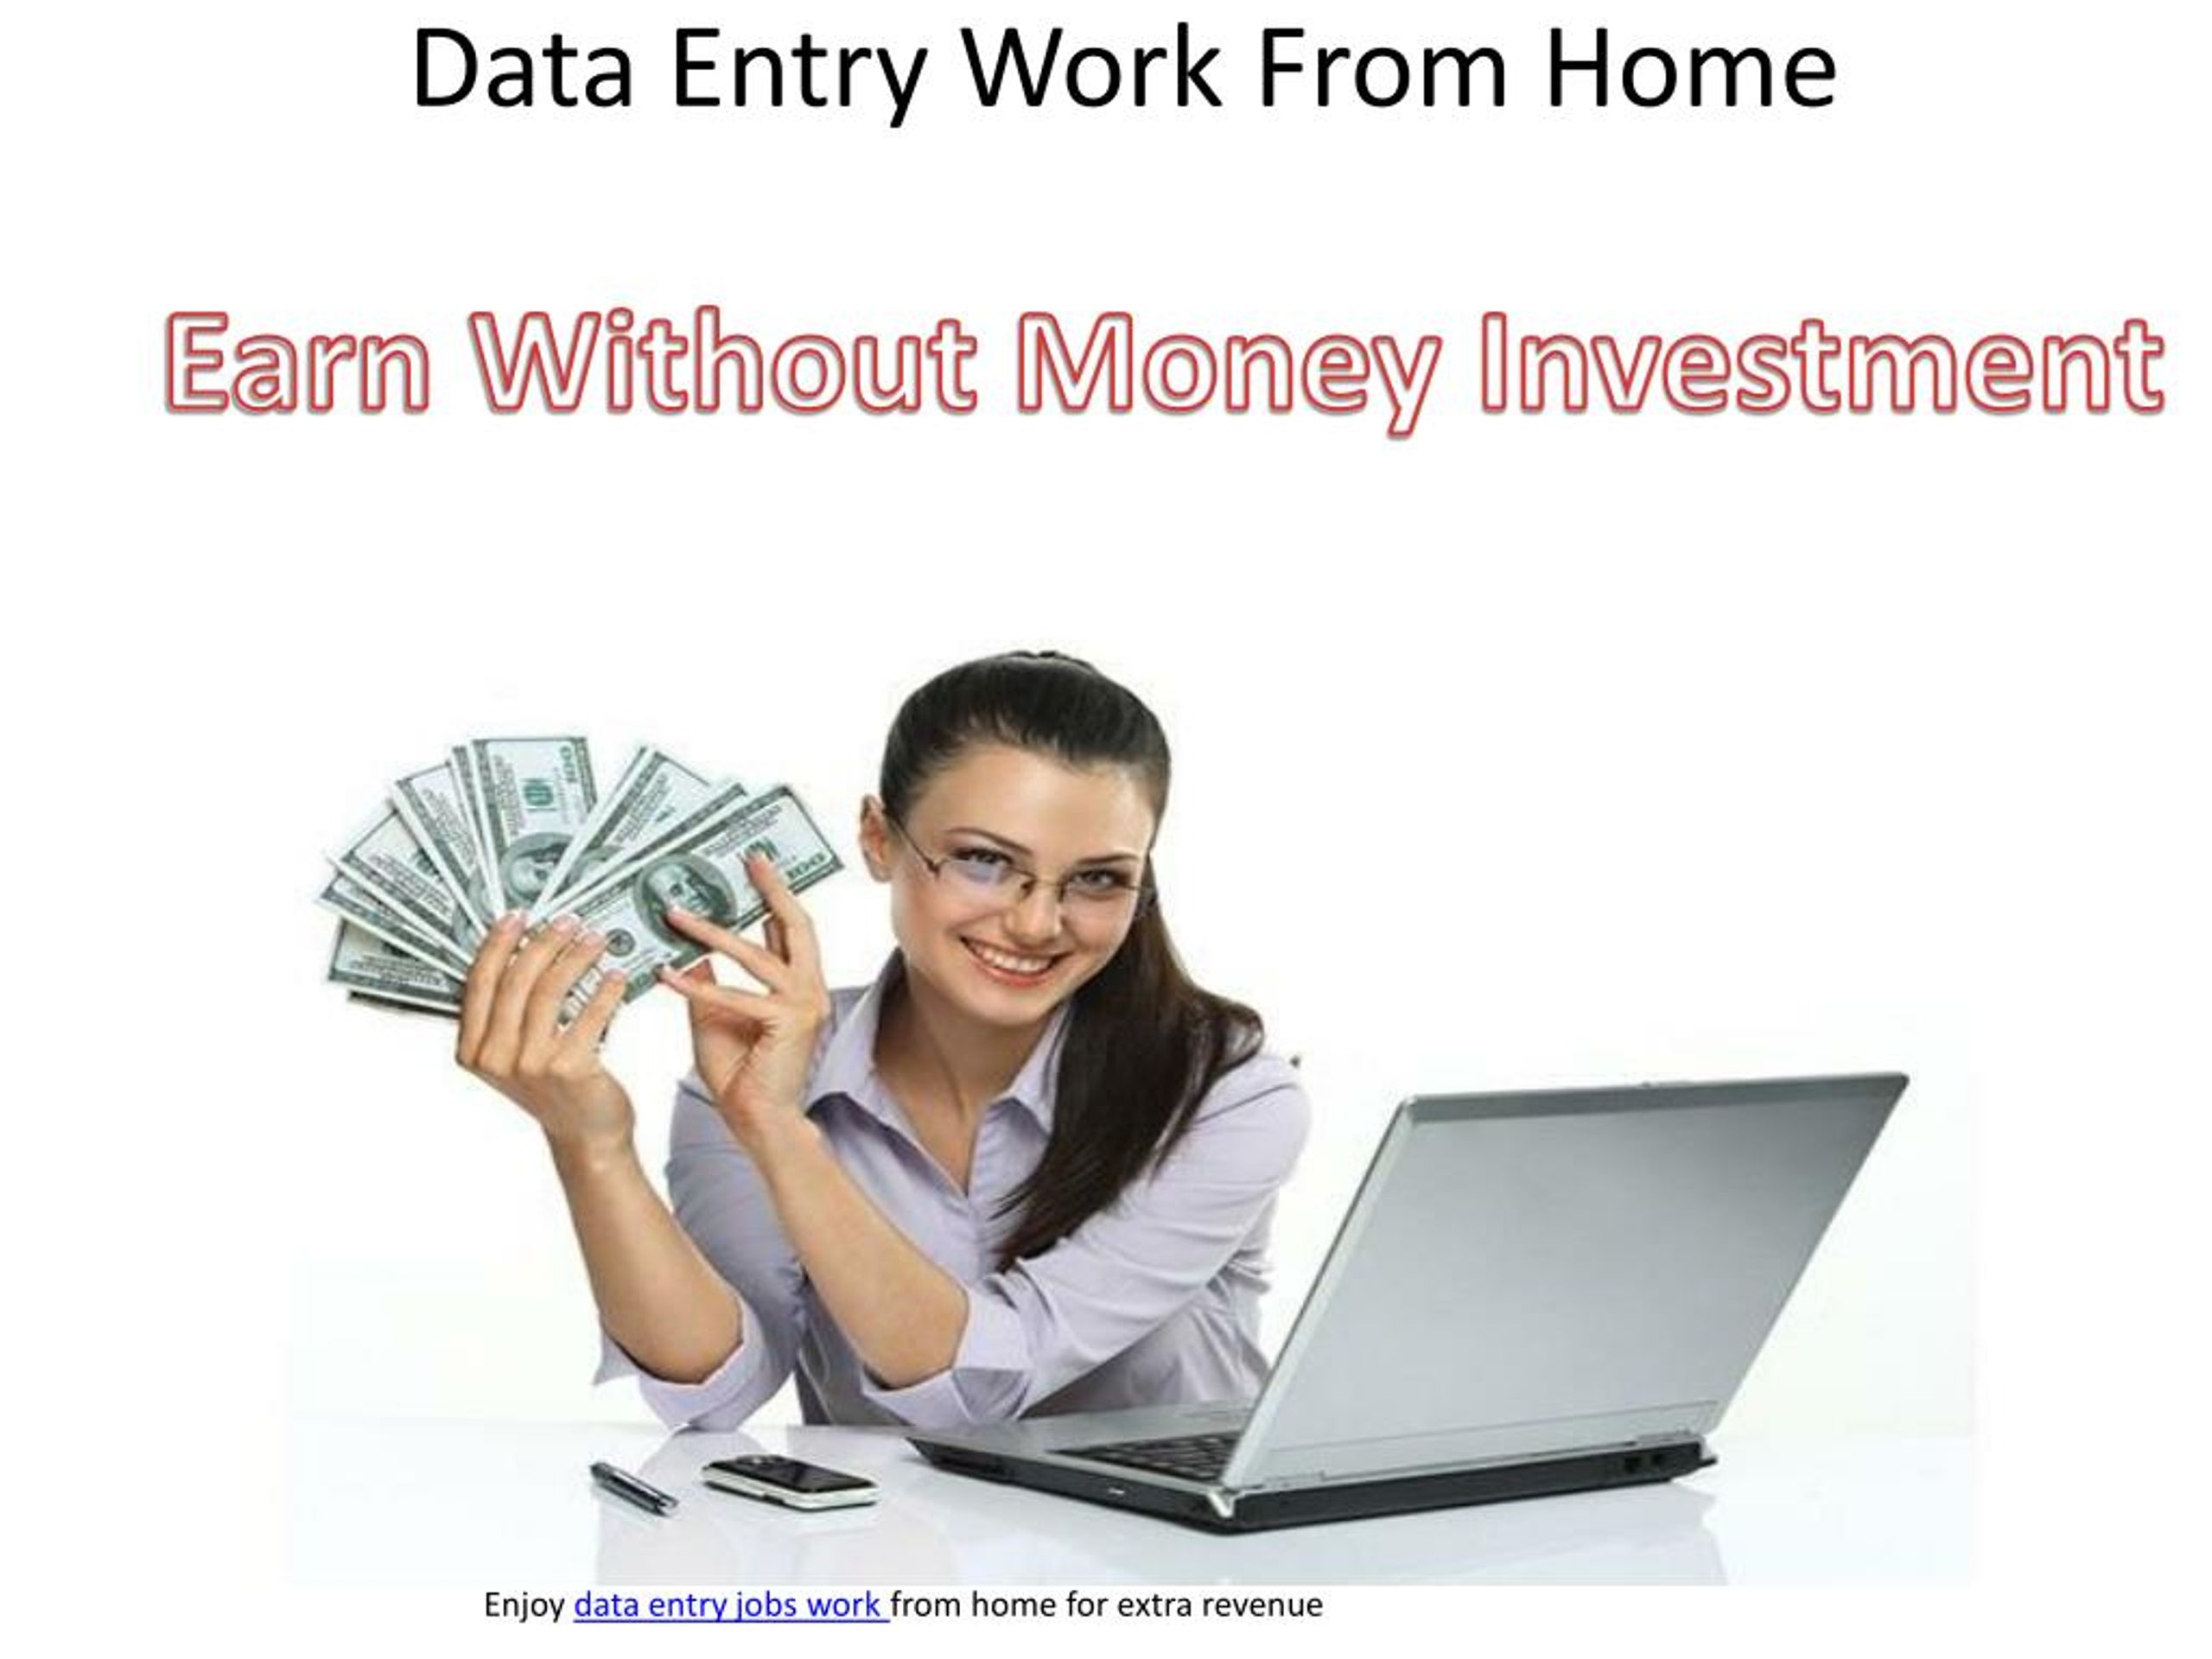 Ppt Online Data Entry Job Work From Home Without Investment Powerpoint Presentation Id 7478035,Where Do Birds Go At Night